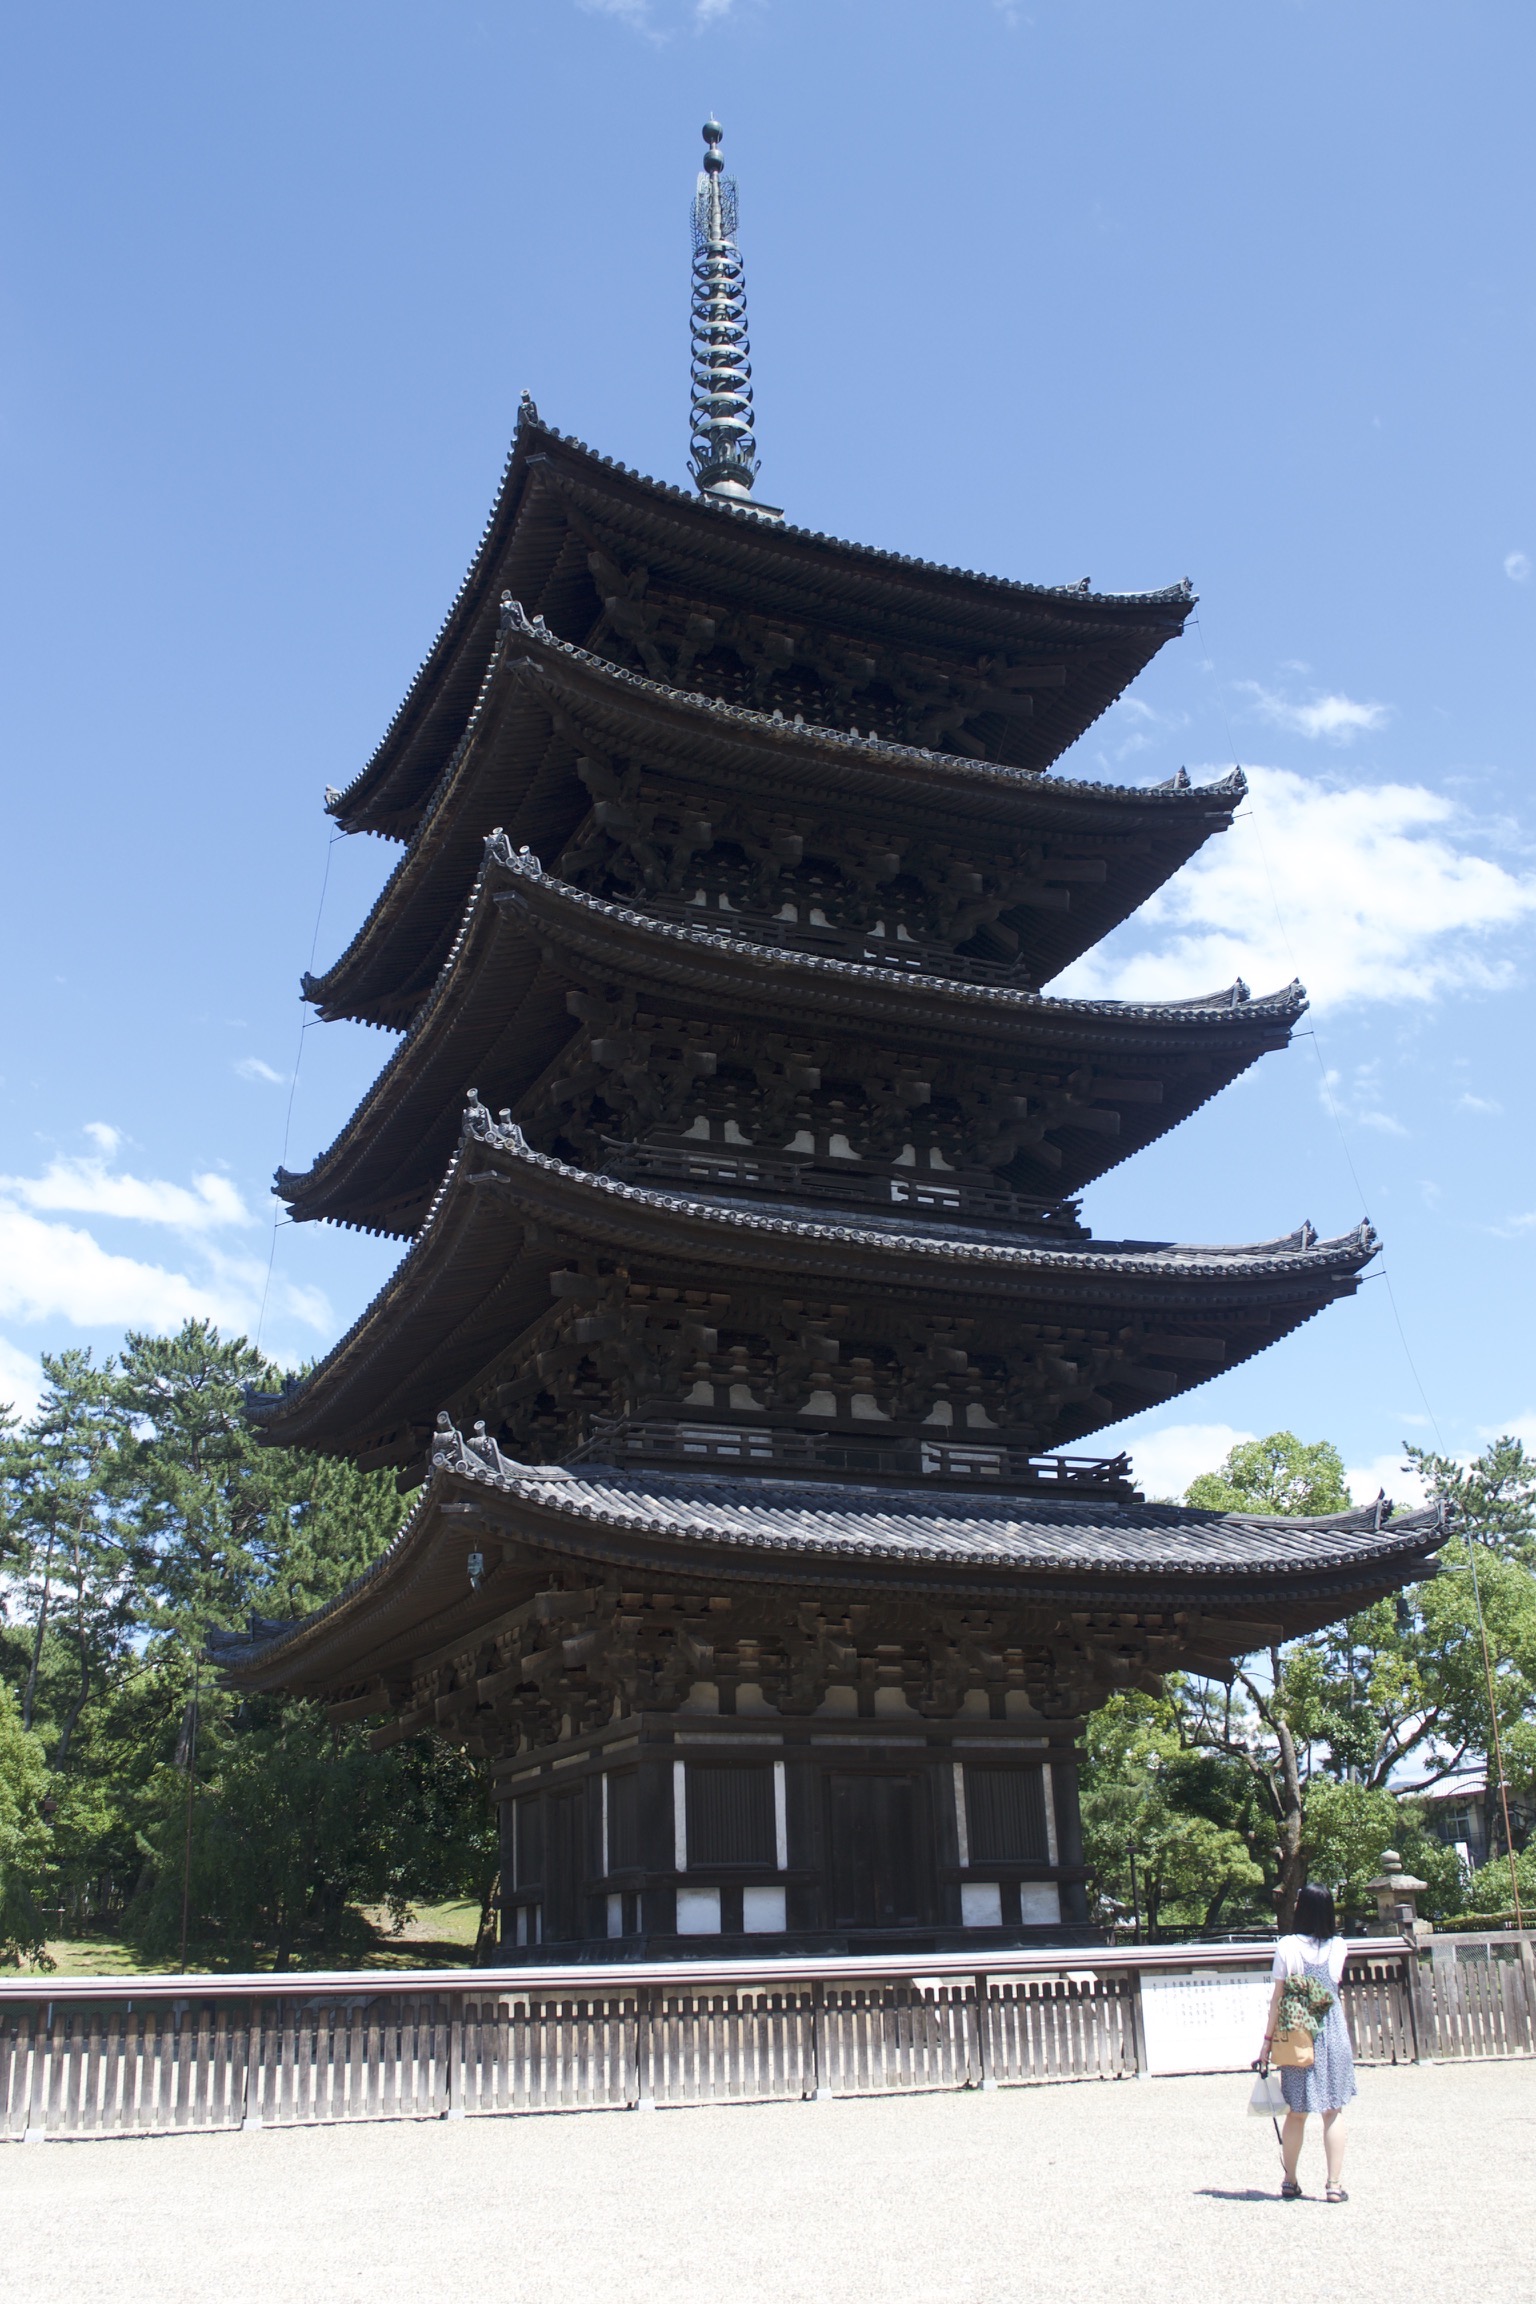 A five-story pagoda with a metal antenna.